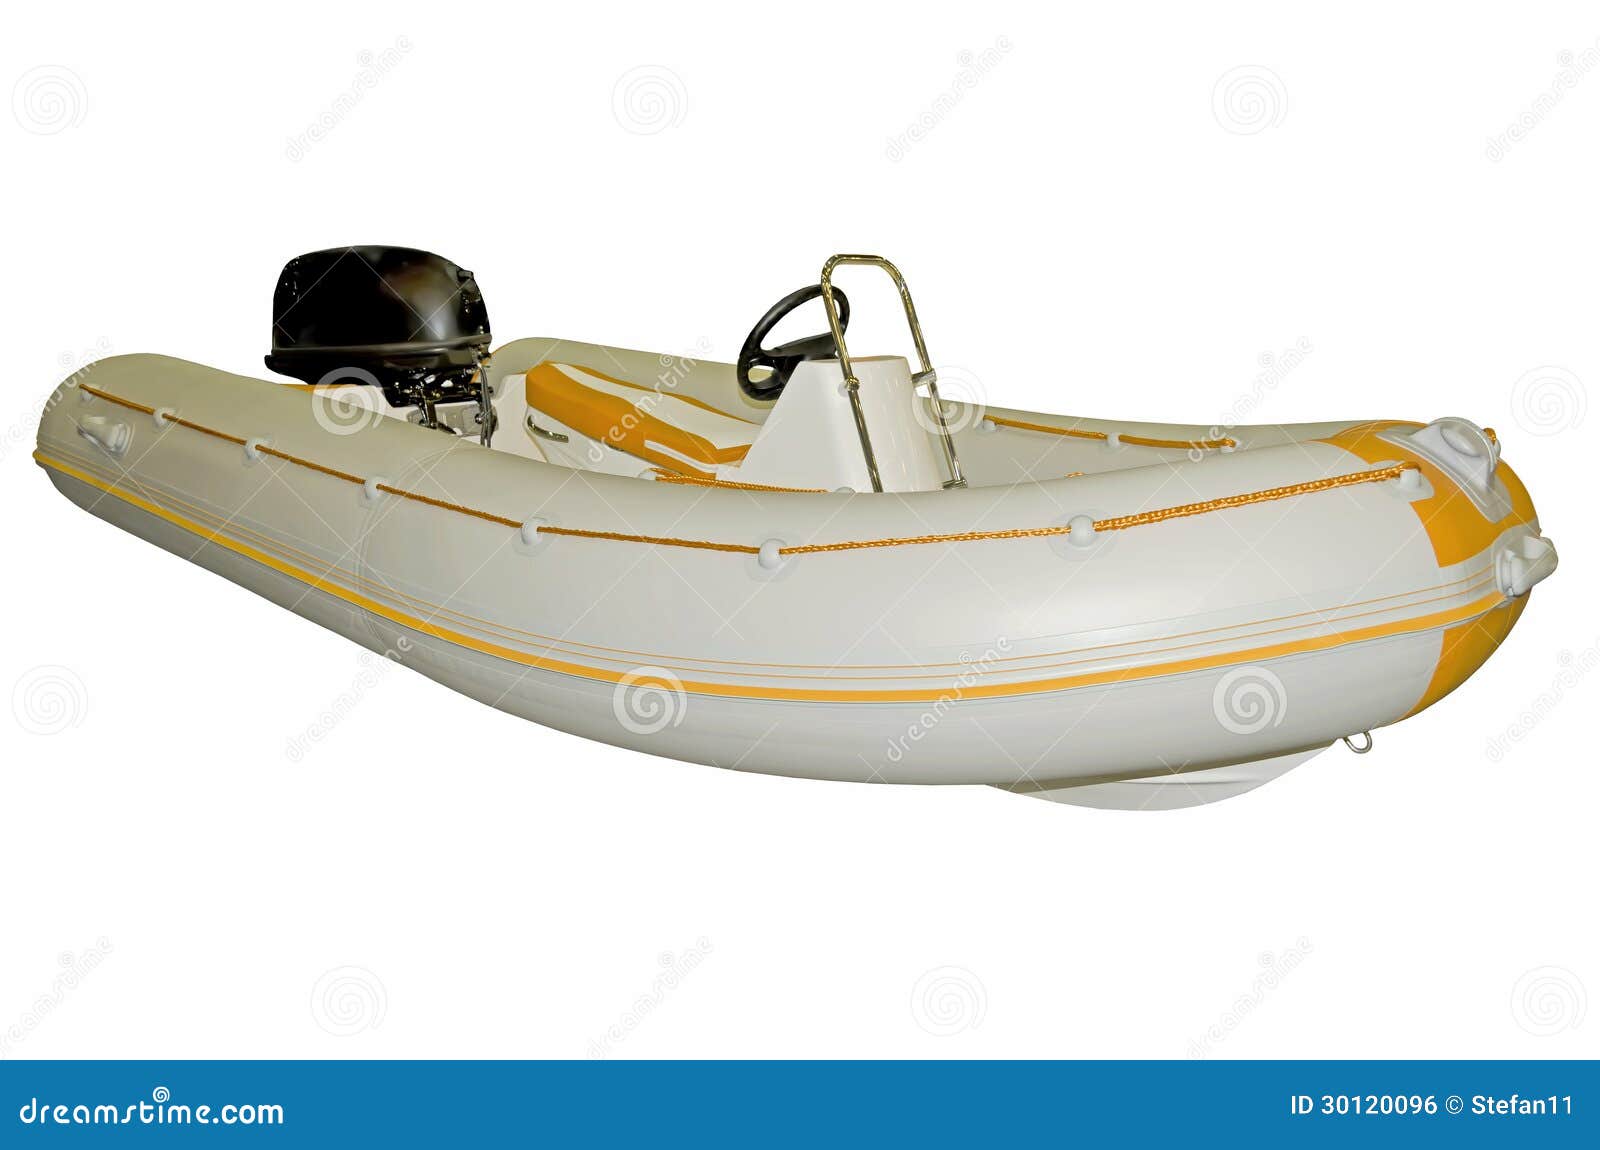 Inflatable Boat With Motor Royalty Free Stock Image - Image: 30120096